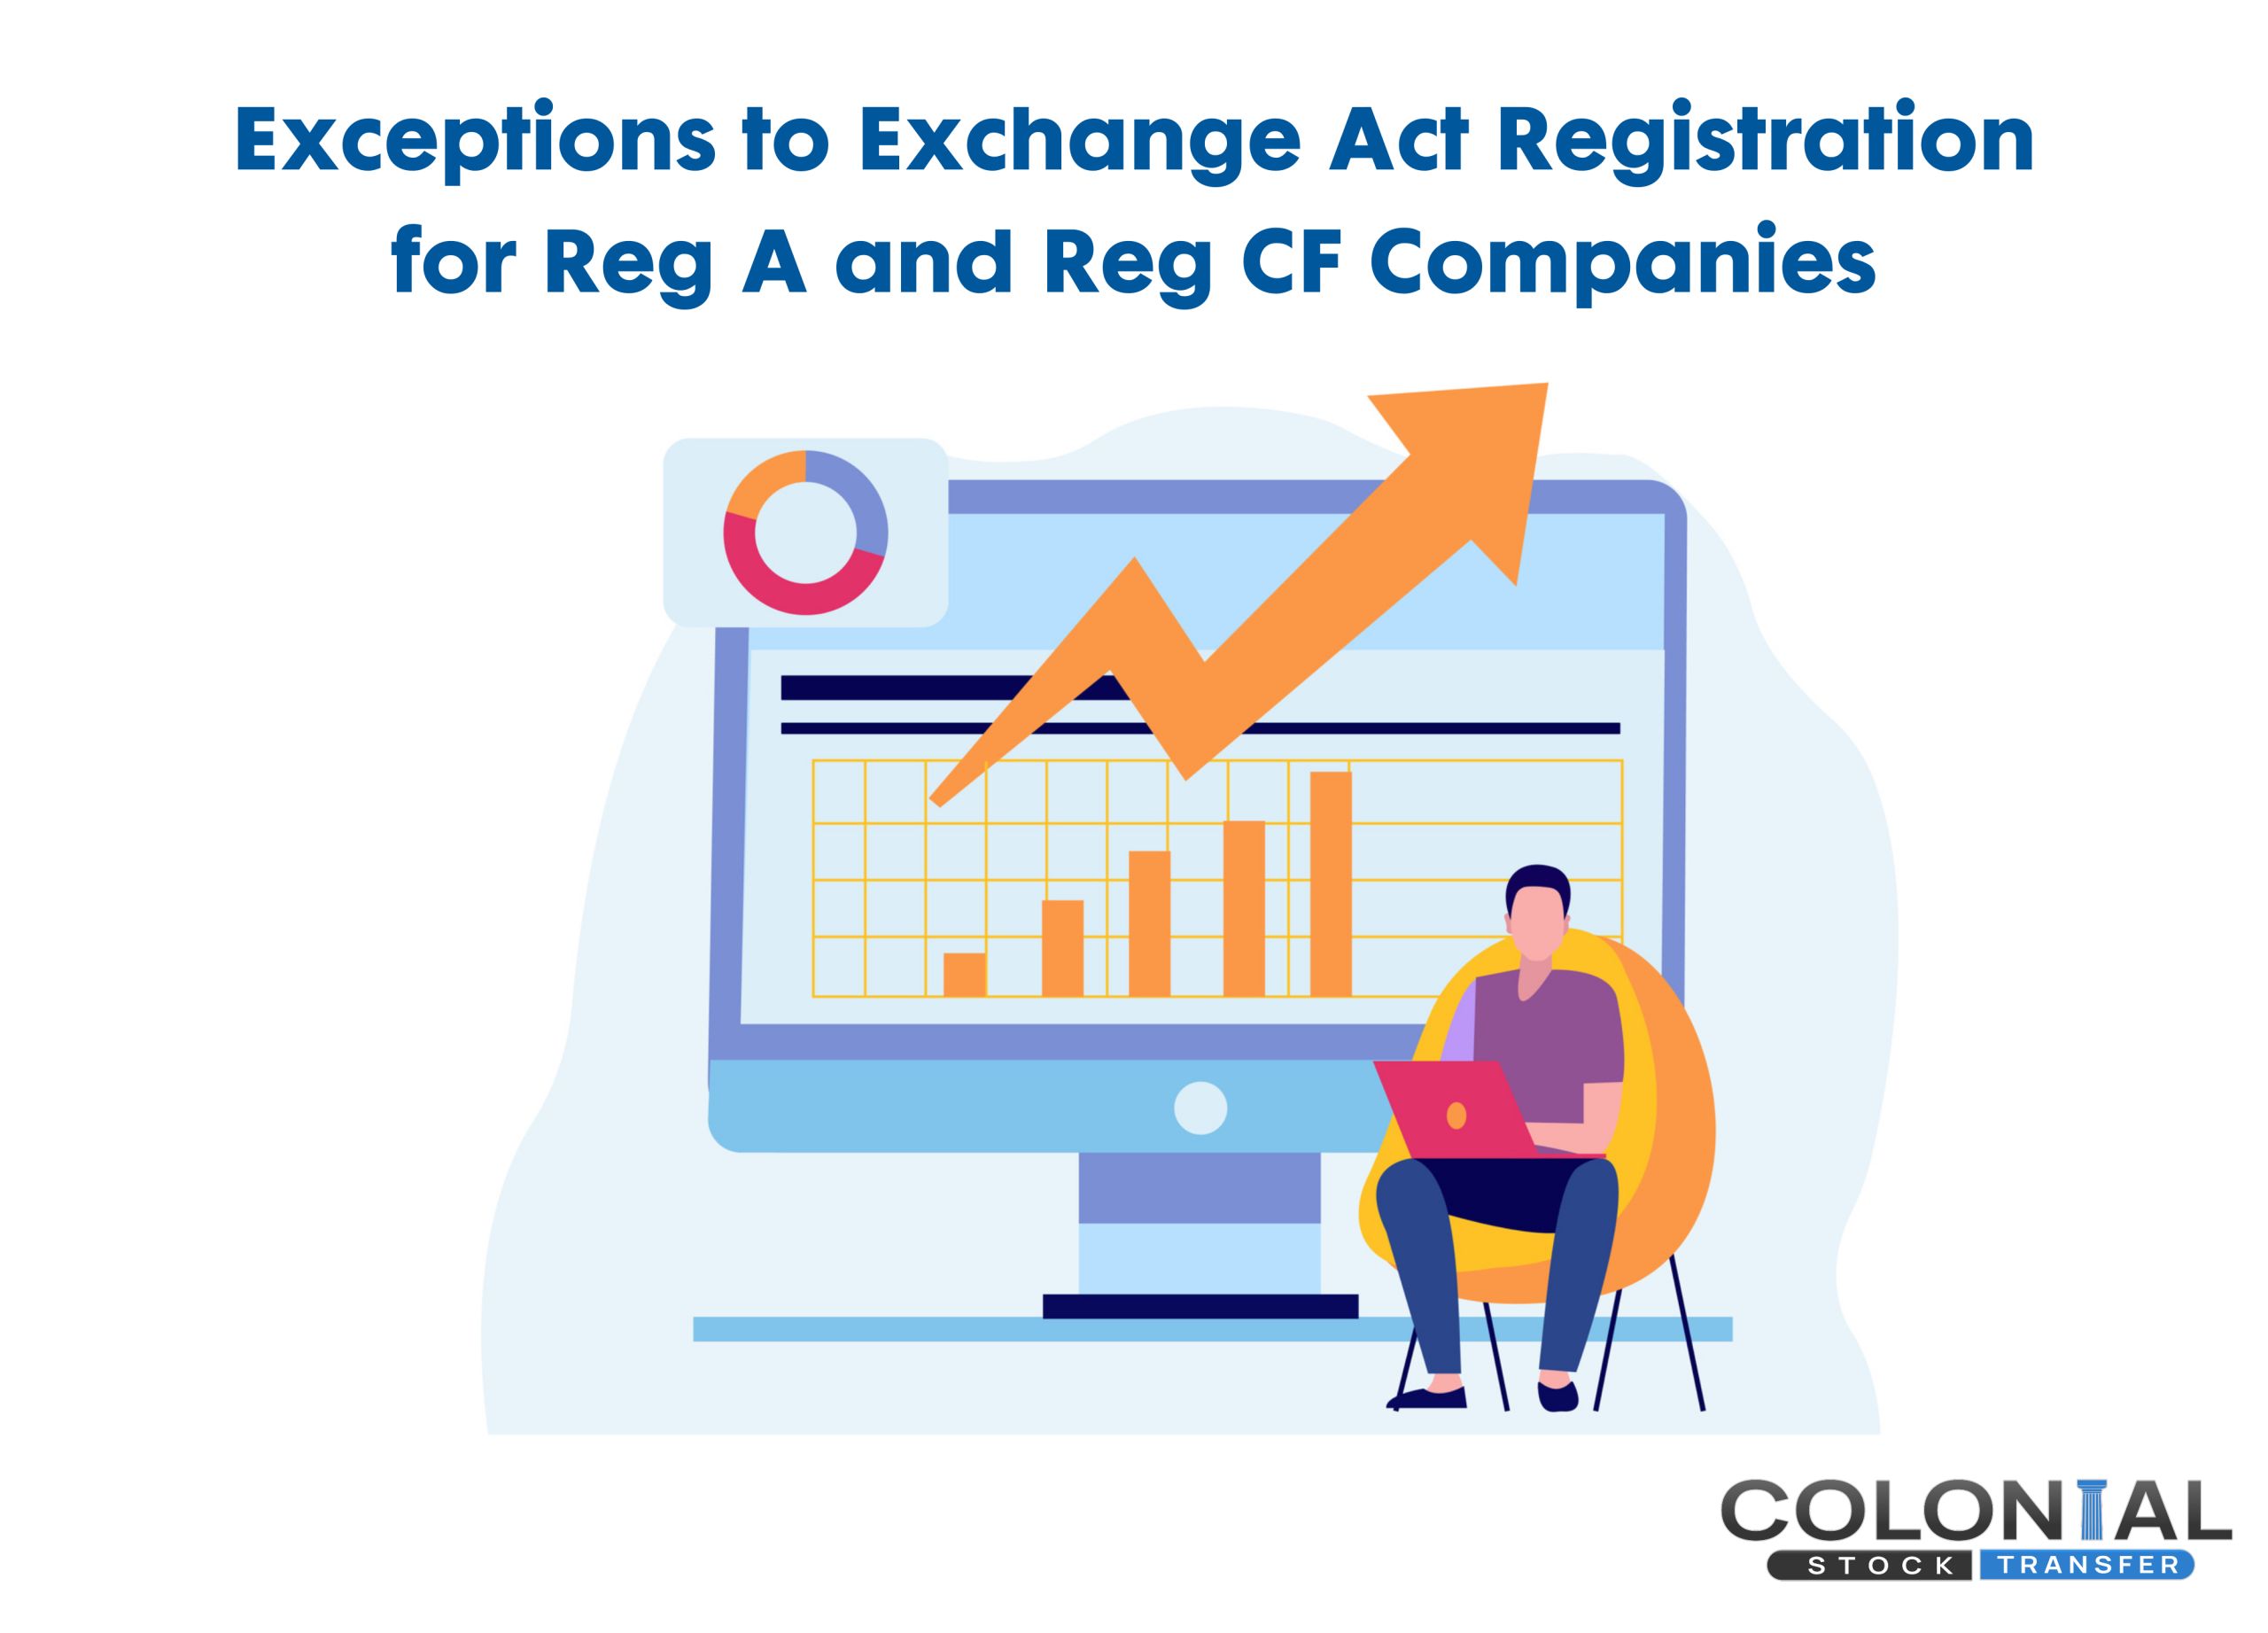 Exceptions to Exchange Act Registration for Reg A and Reg CF Companies